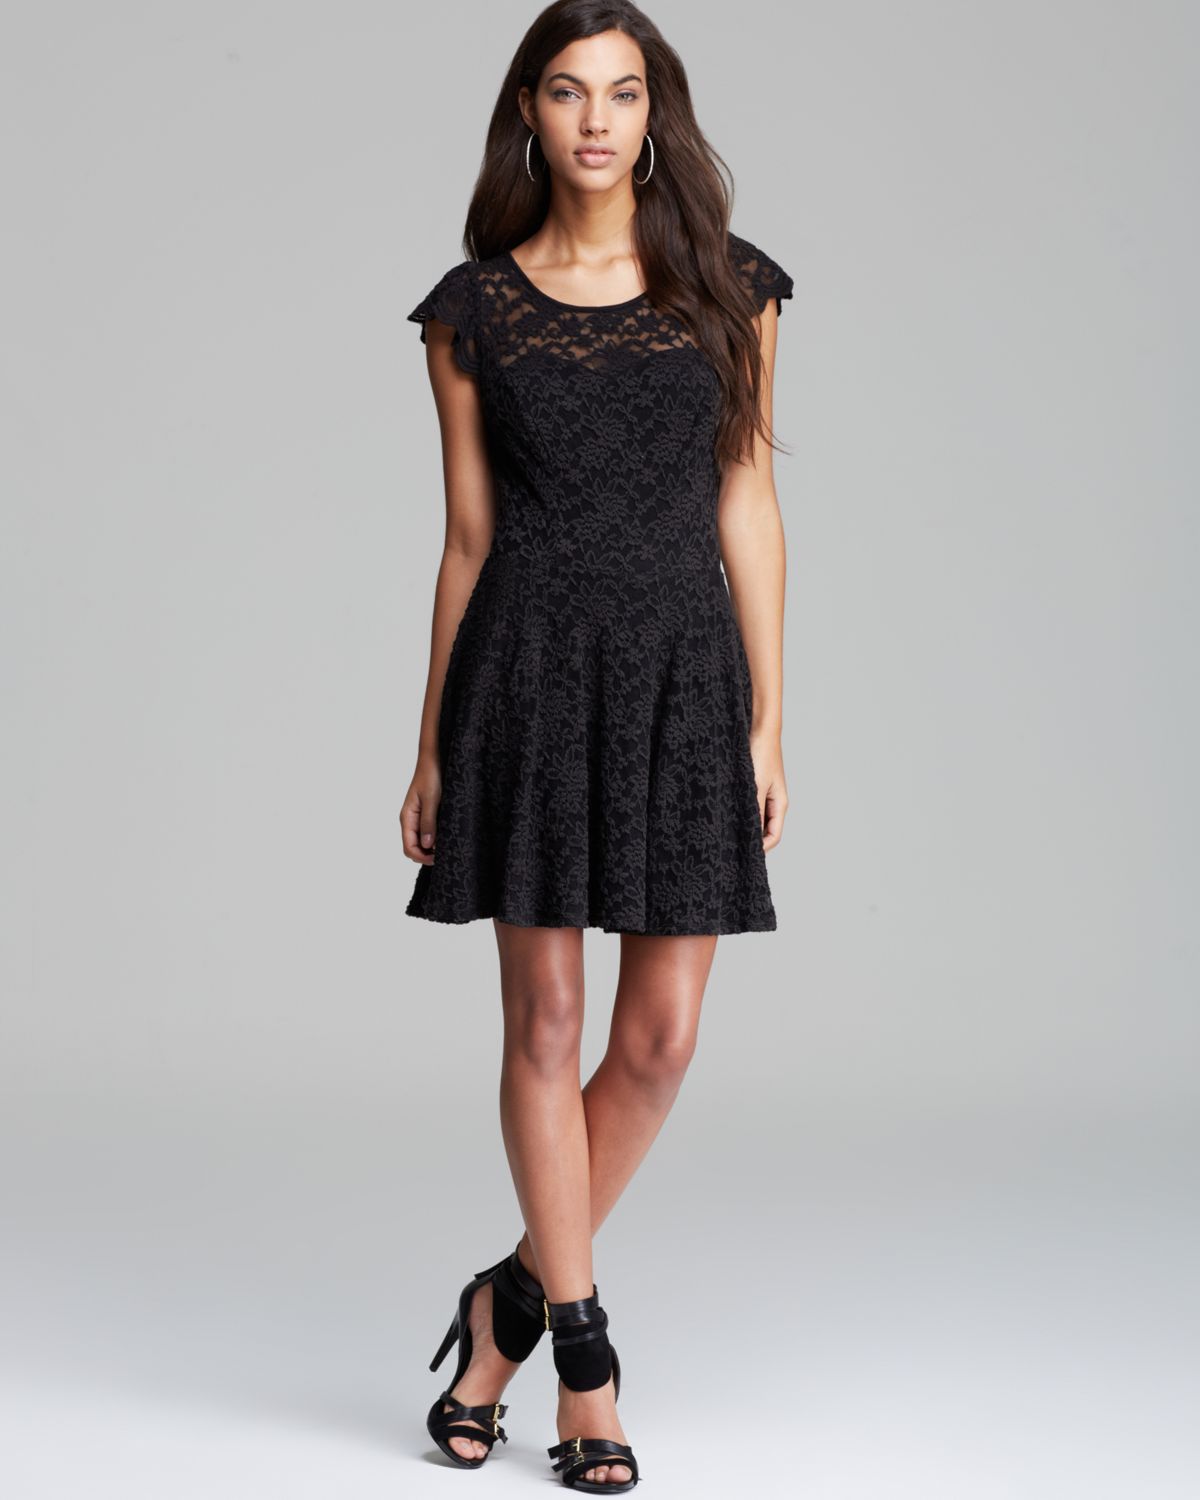 Lyst - Guess Dress Floral Lace in Black